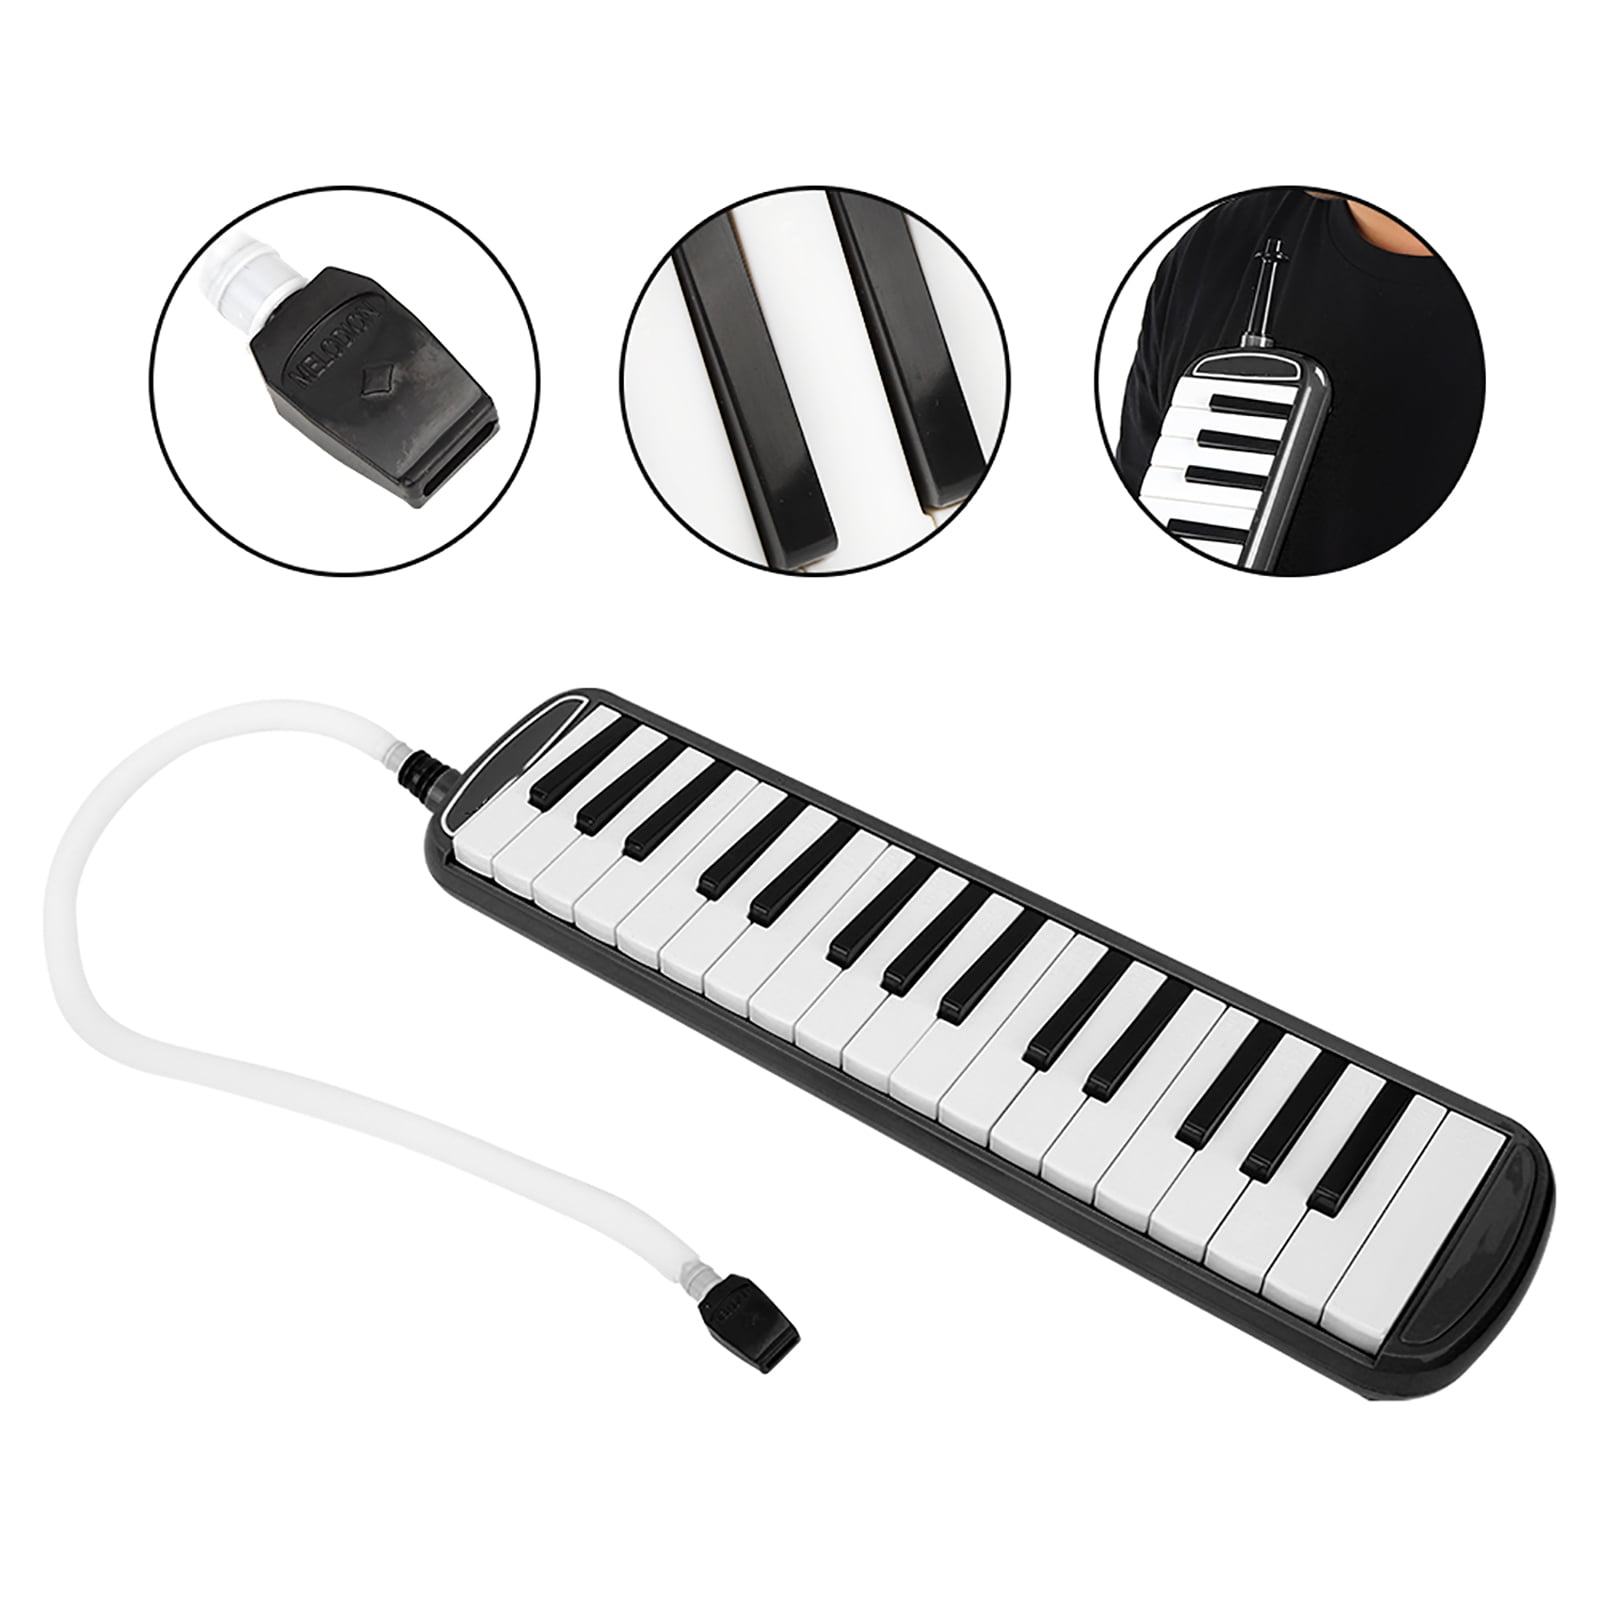 Melodica 32 Key (Black) Pianica Blow Piano Keyboard Harmonica Wind  Instrument /w Portable Carrying Bag, 2 Long Tube Mouthpiece, 2 Trumpet  Mouthpiece Kit for Beginners Kids Fun Music Gift 